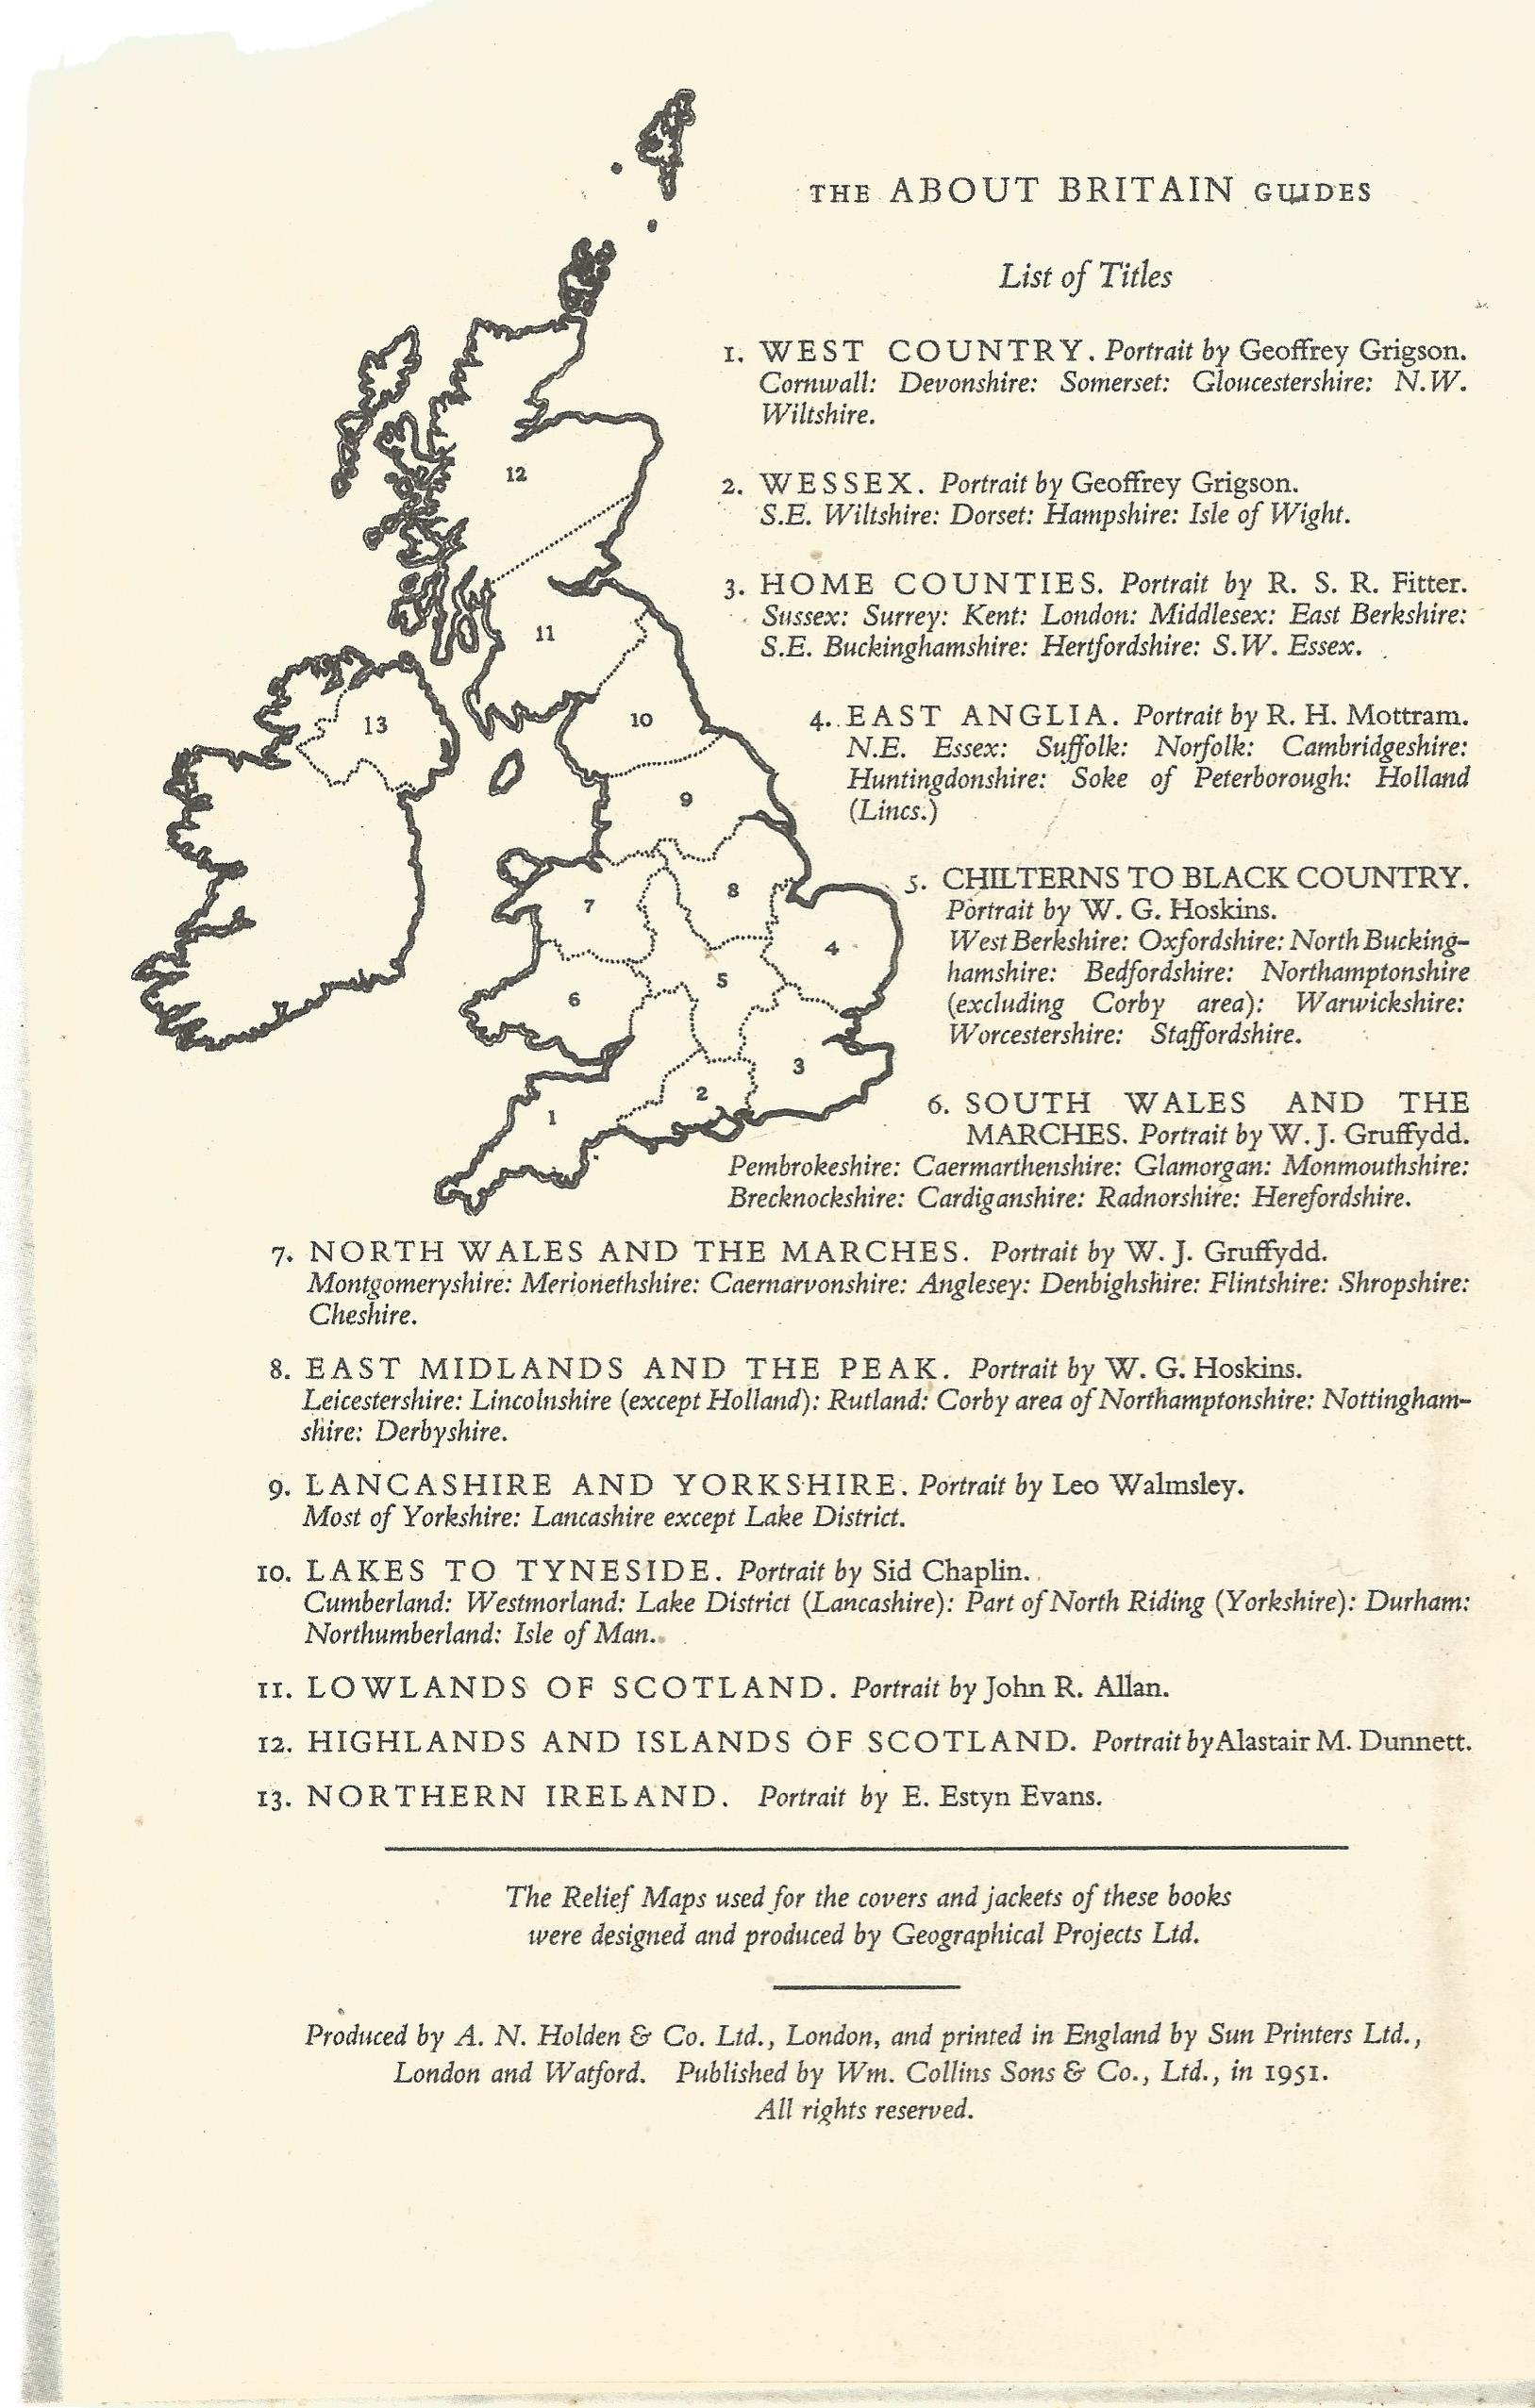 About Britain No 3 Home Counties by R S R Fitter Hardback Book 1951 First Edition published for - Image 3 of 3